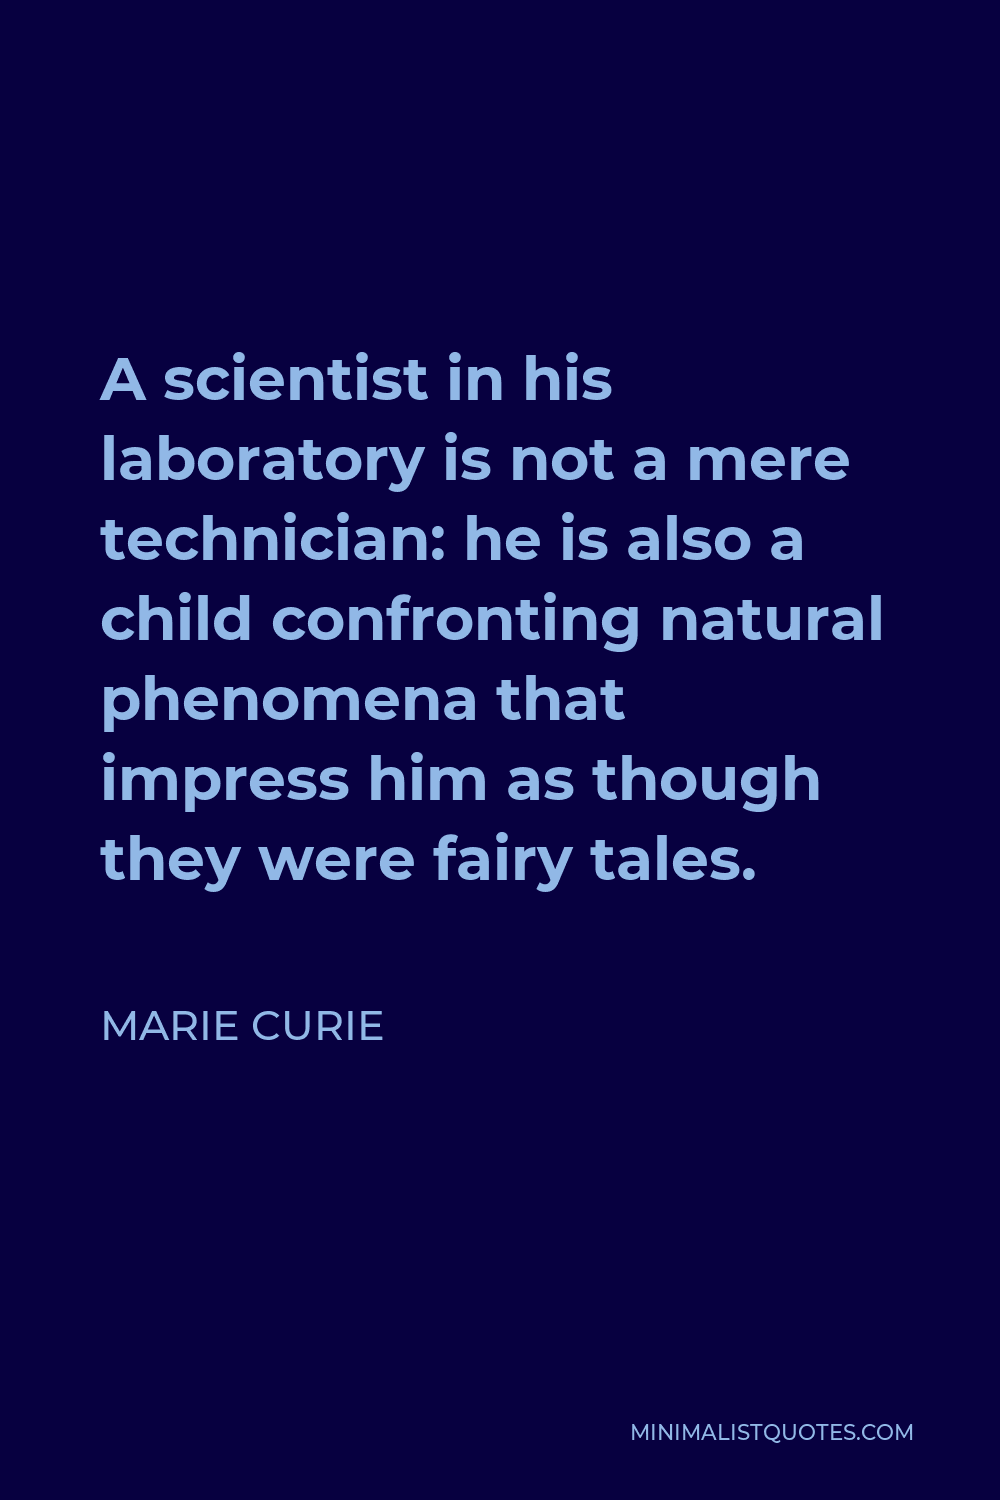 Marie Curie Quote - A scientist in his laboratory is not a mere technician: he is also a child confronting natural phenomena that impress him as though they were fairy tales.